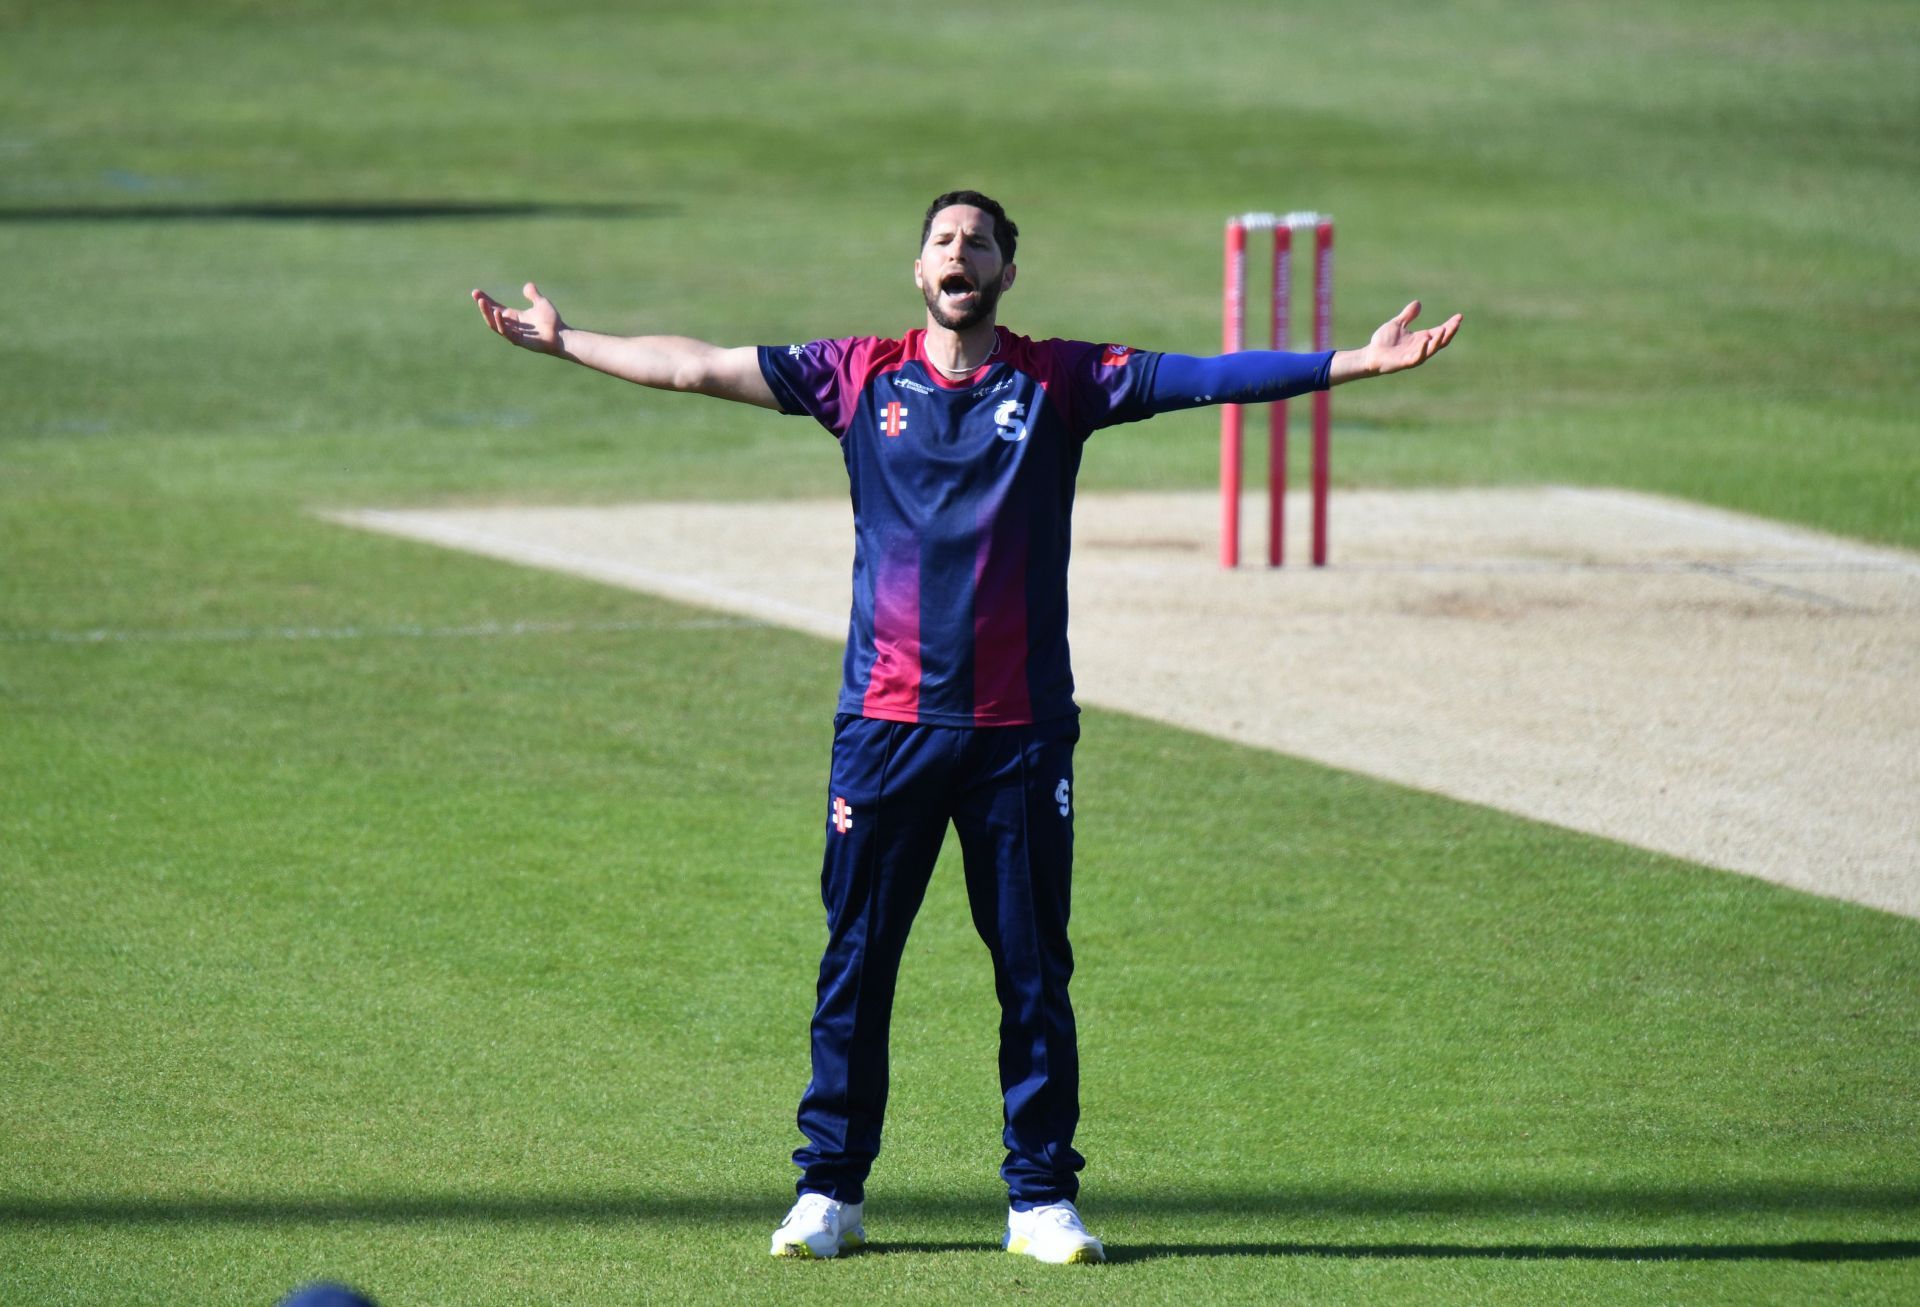 Wayne Parnell joined RCB as a replacement signing (Image: Getty)